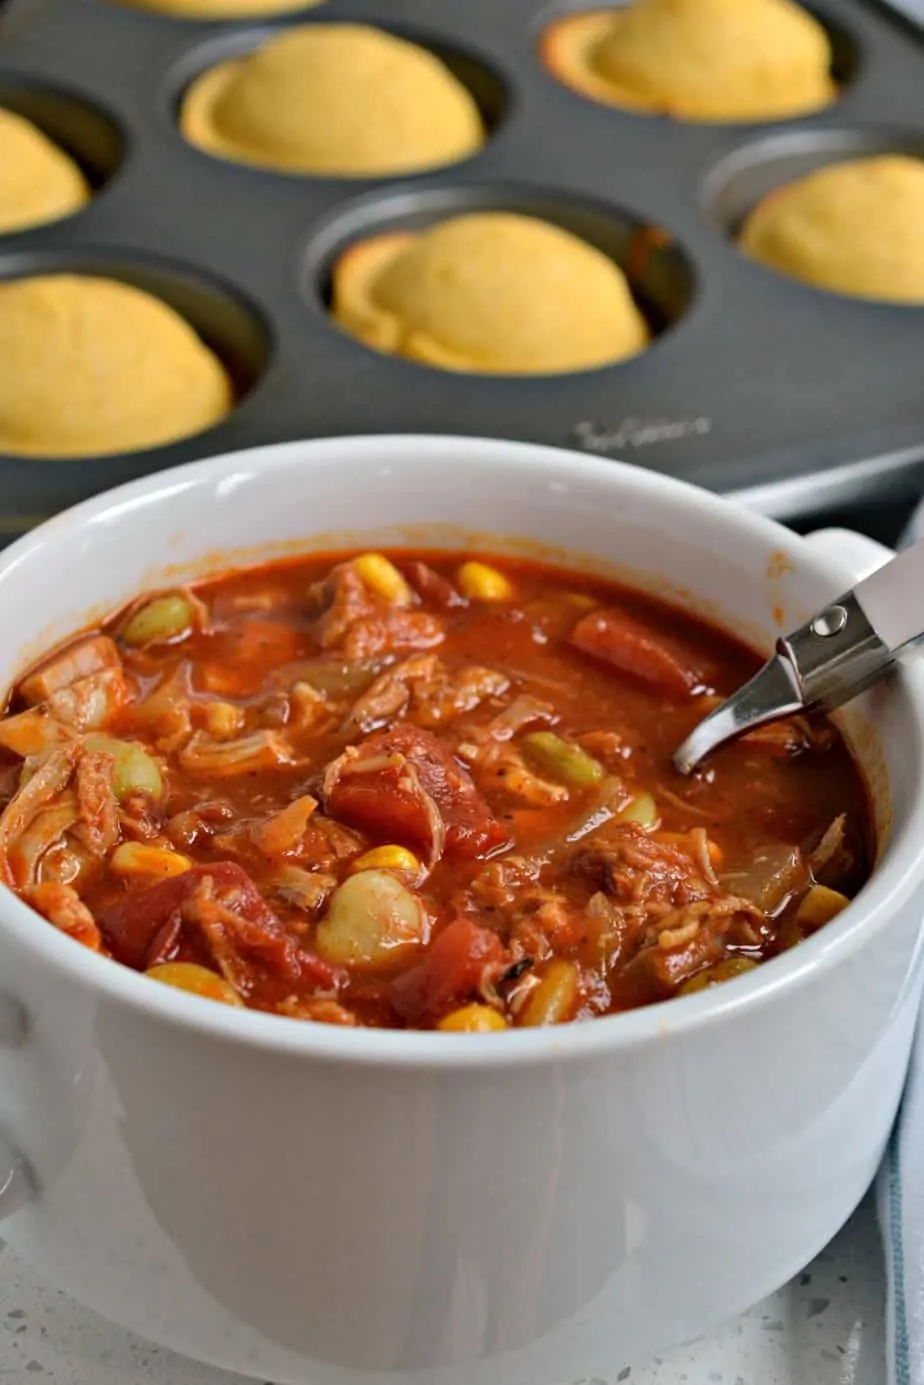 With already cooked meats this Brunswick Stew recipe comes together quickly and easily.